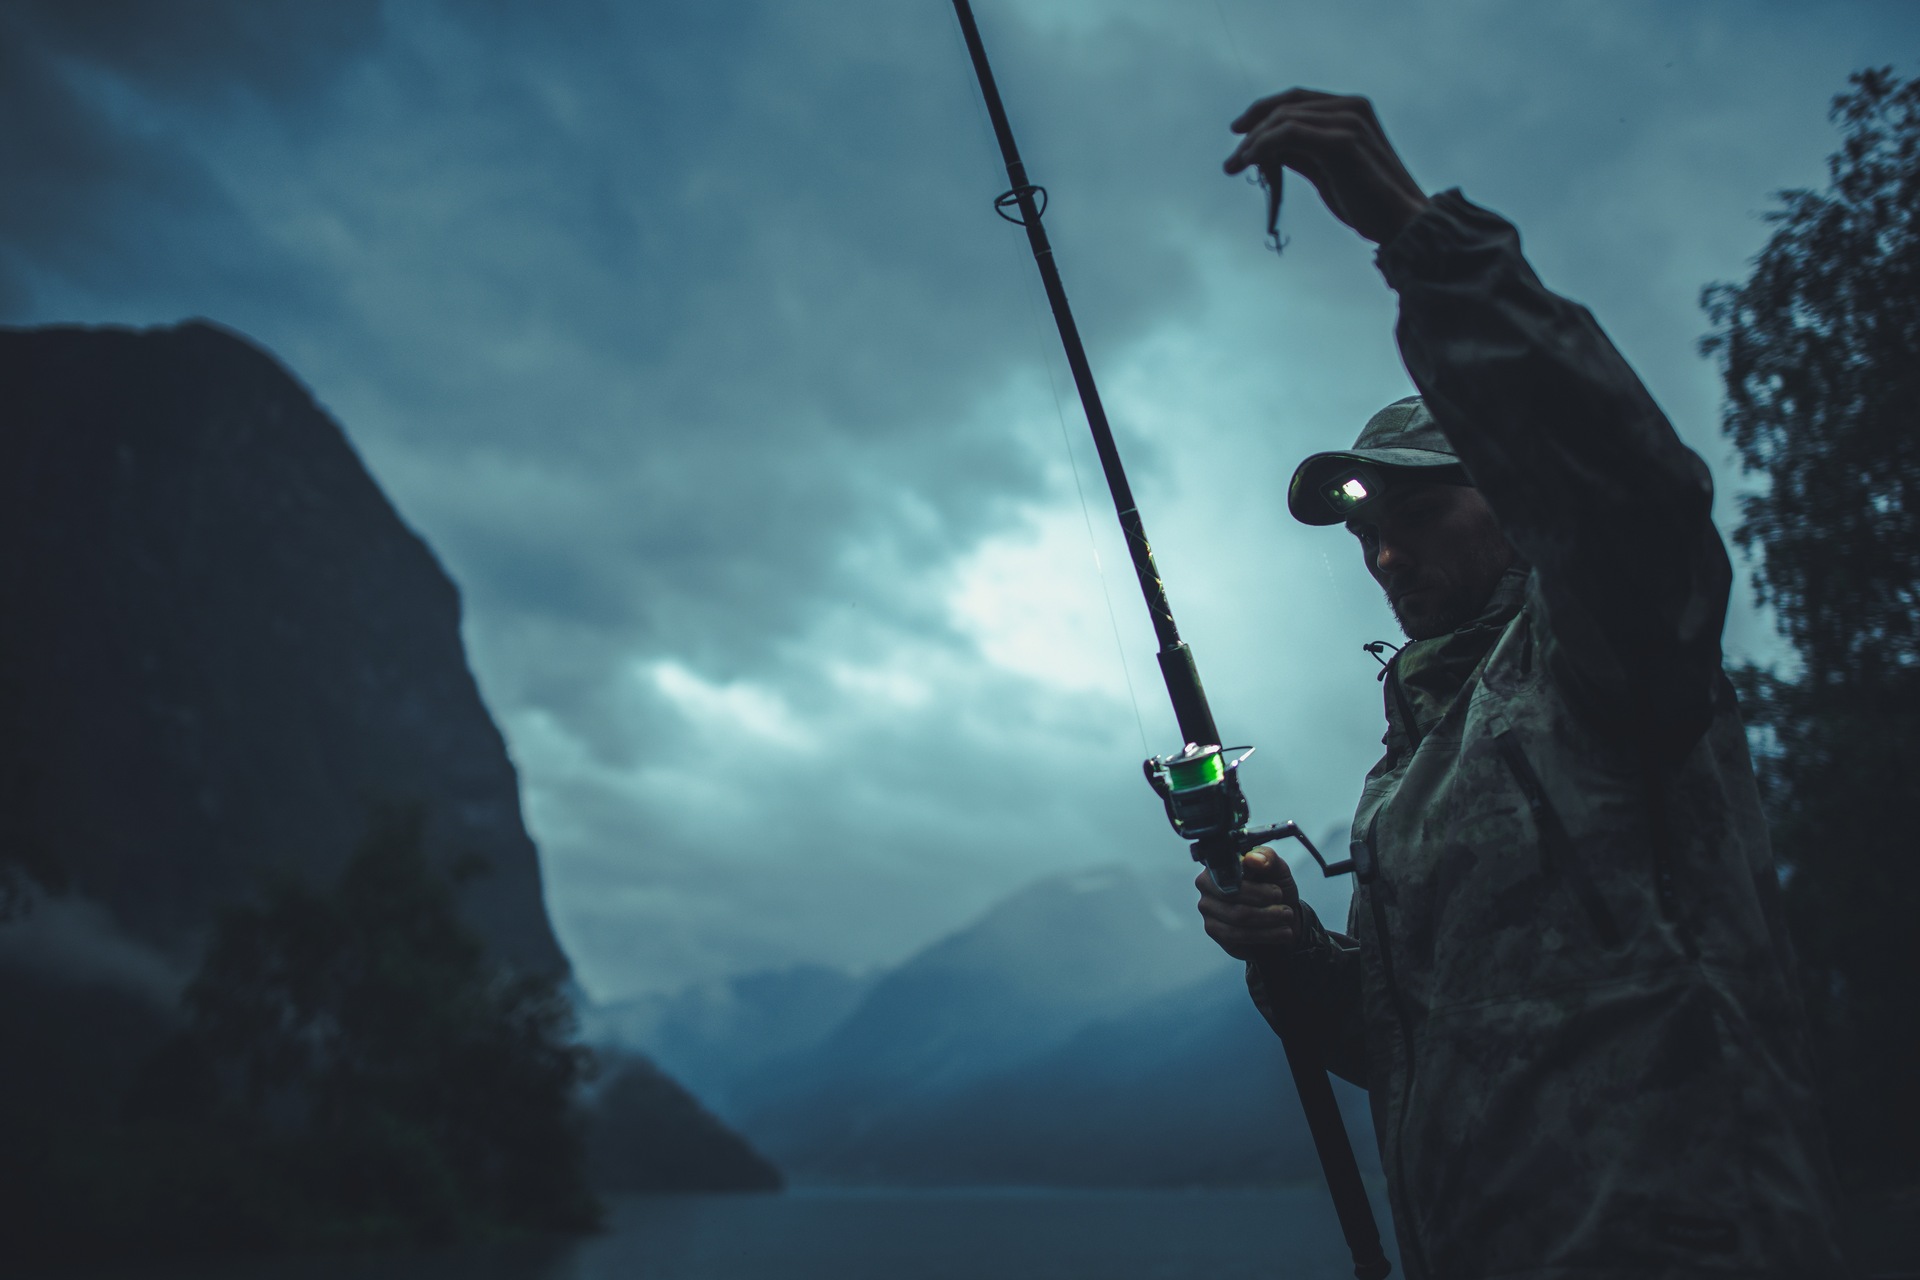 An angler holding a rod and lure